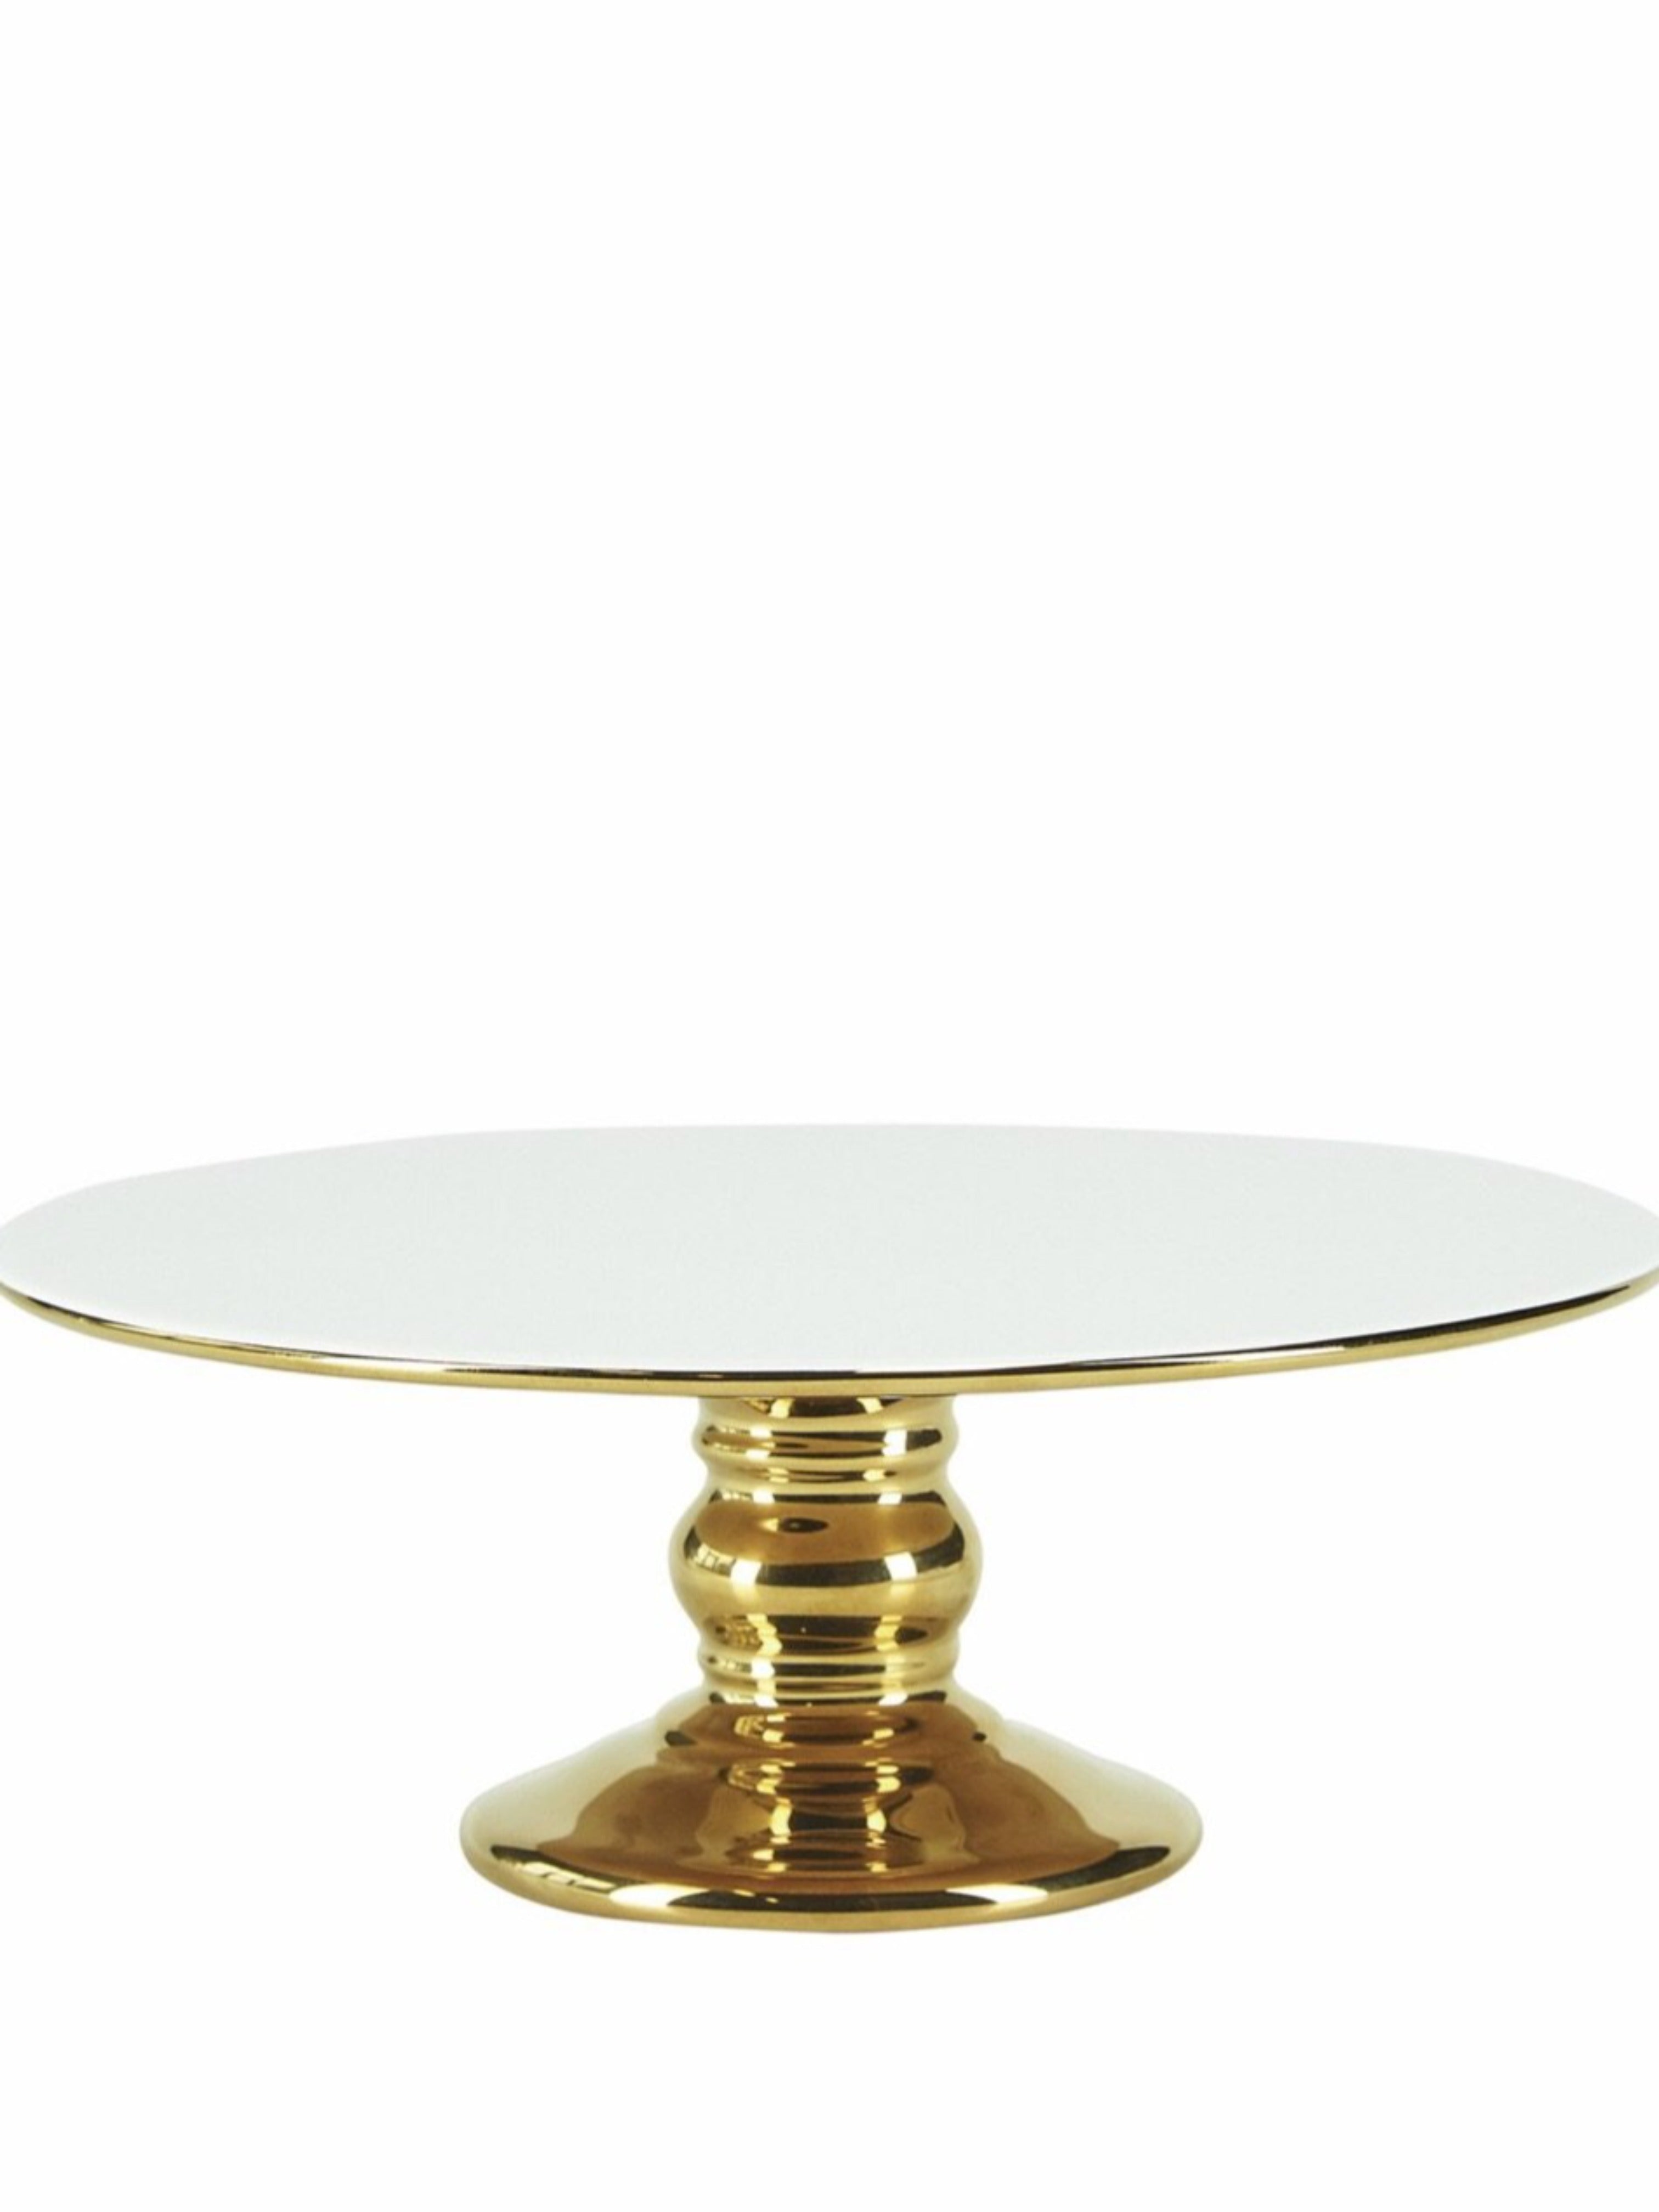 Miss Etoile White Cake Stand with a Gold Foot